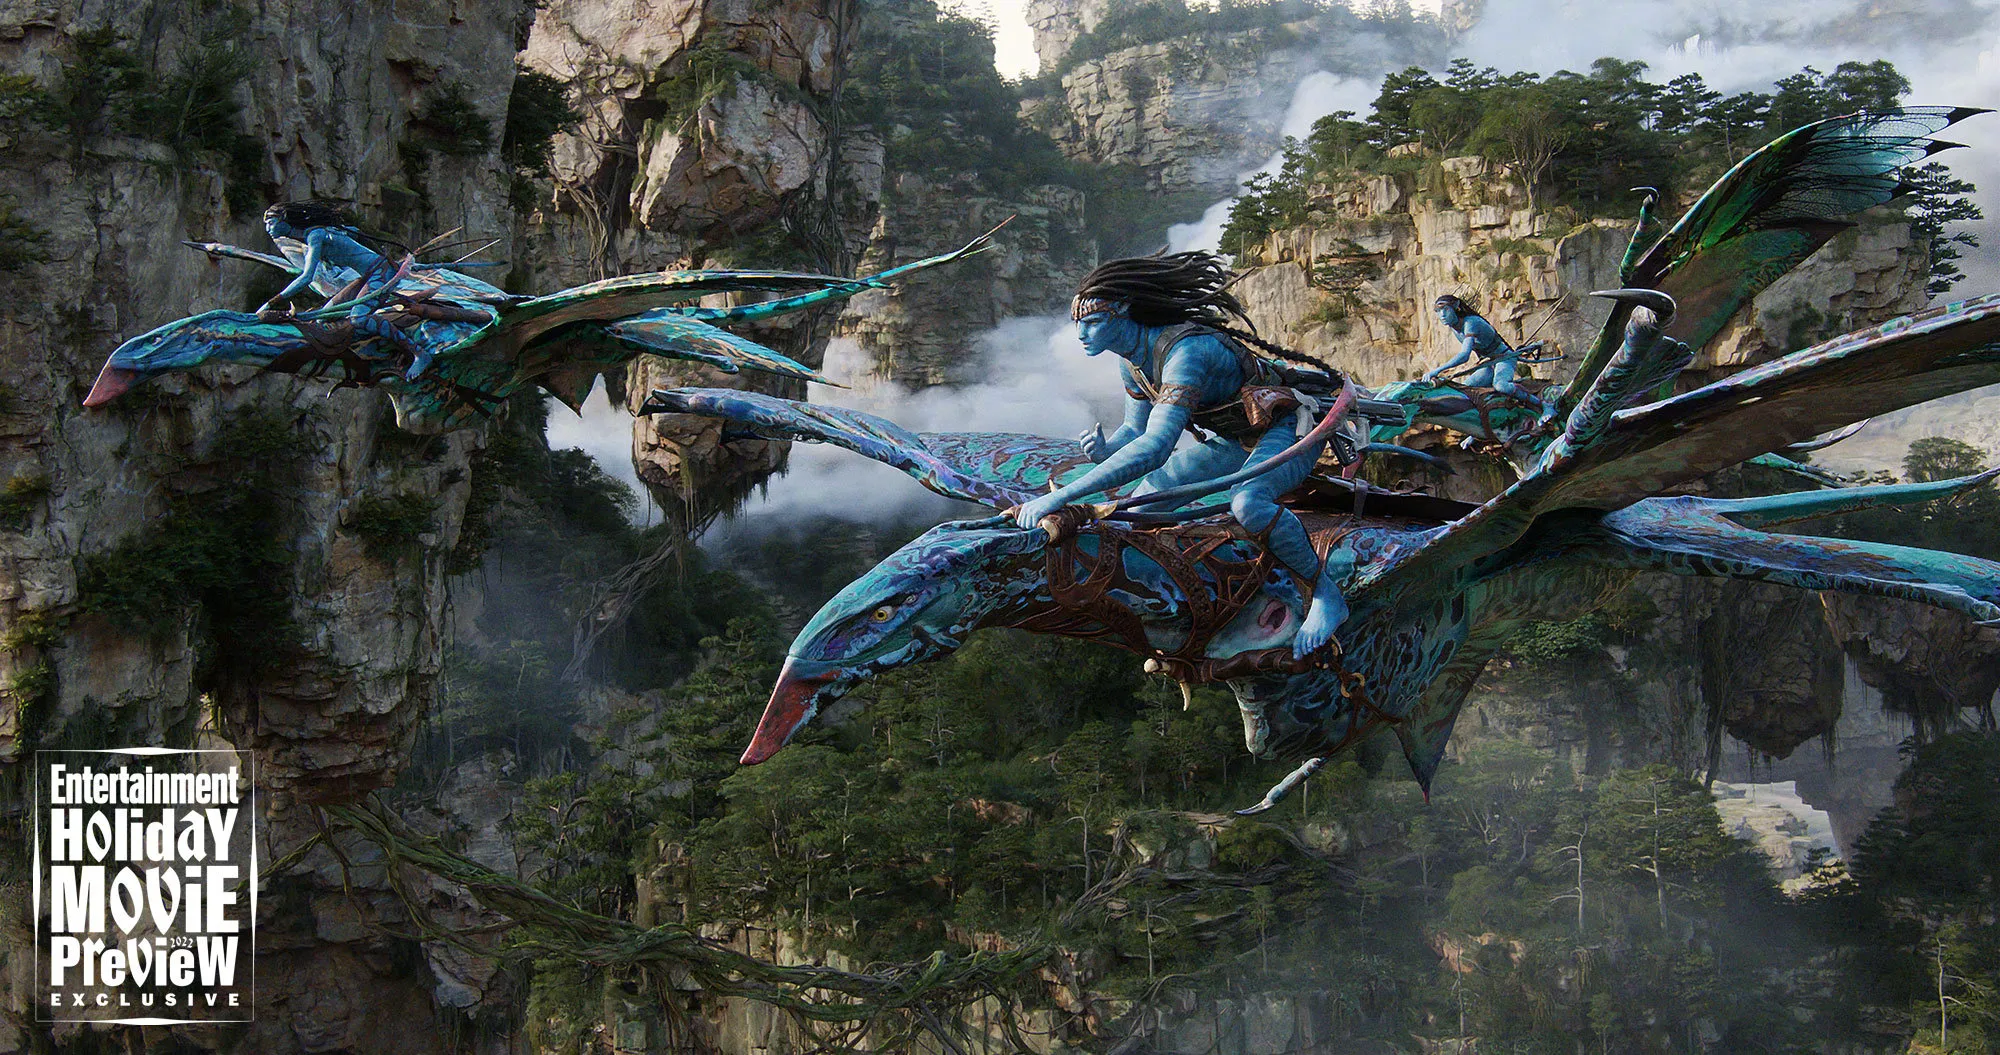 'Avatar: The Way of Water' Releases Multiple New Stills, Returns to the Alien World of Pandora | FMV6